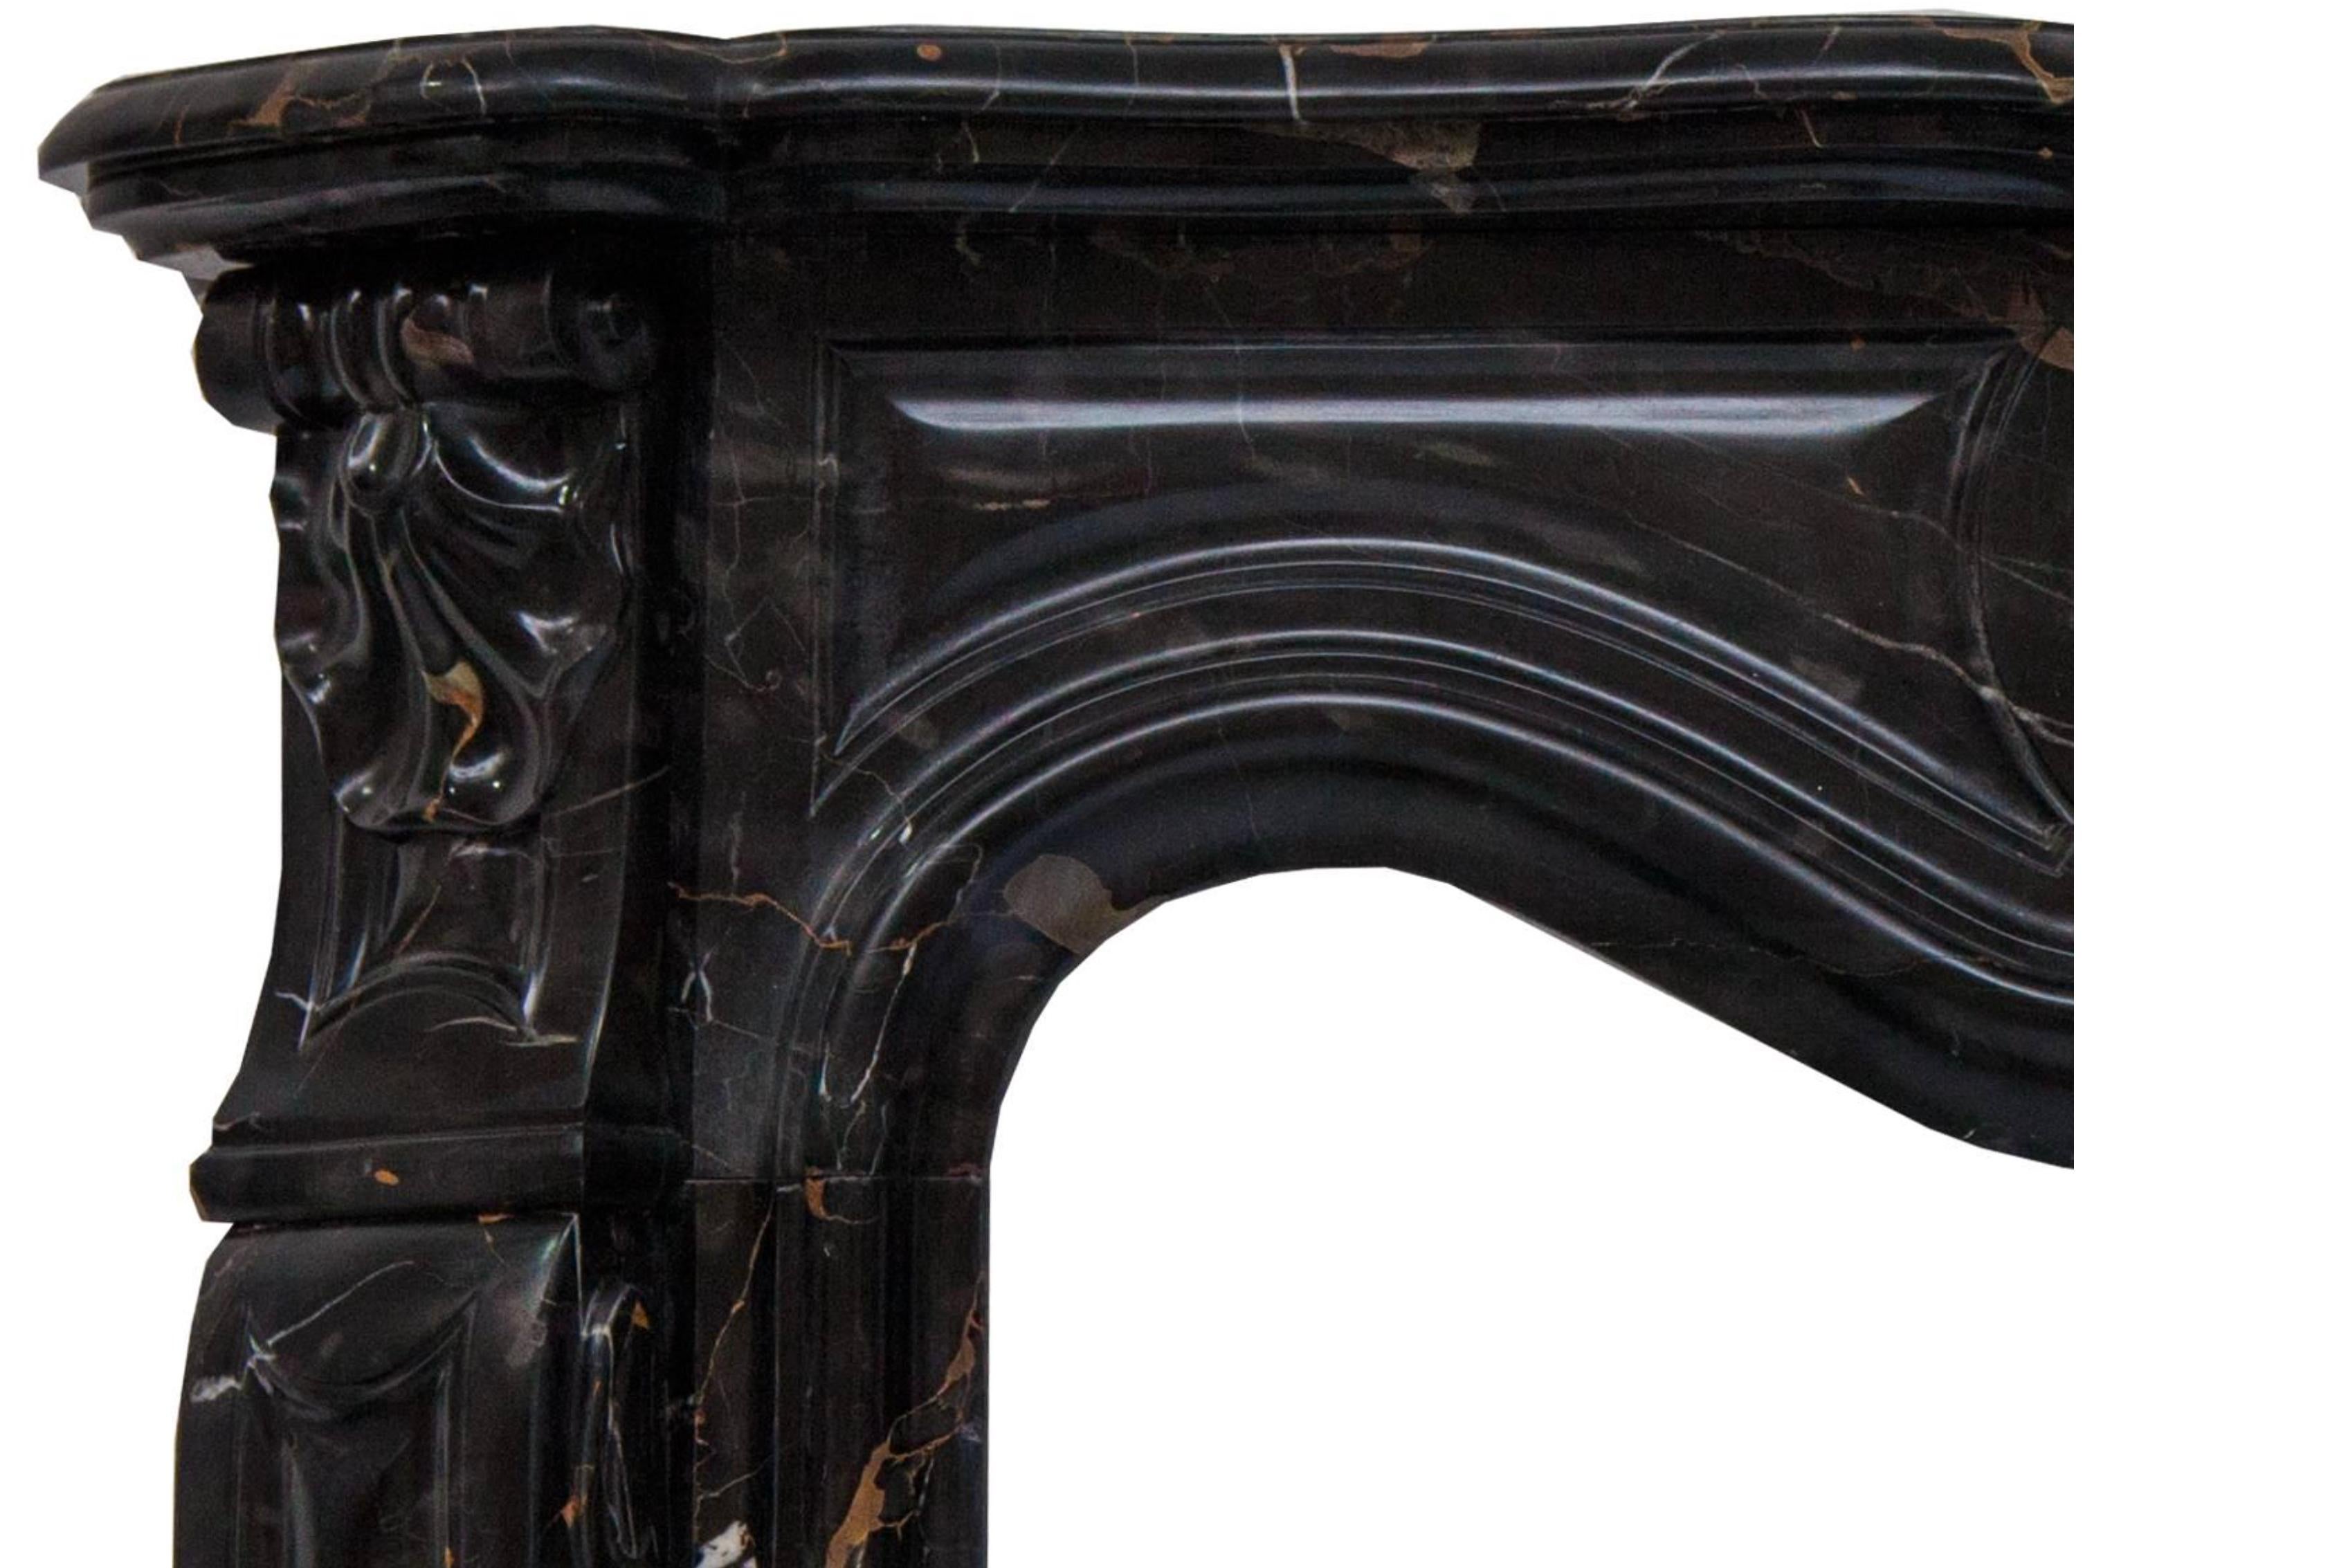 French Rococo Louis XV fireplace mantel made in a superb Potoro marble. Hand carved molded shelf above a paneled frieze, centered by an elaborate scrolled cartouche enclosed on the end blocks set above the angled scrolled jambs.